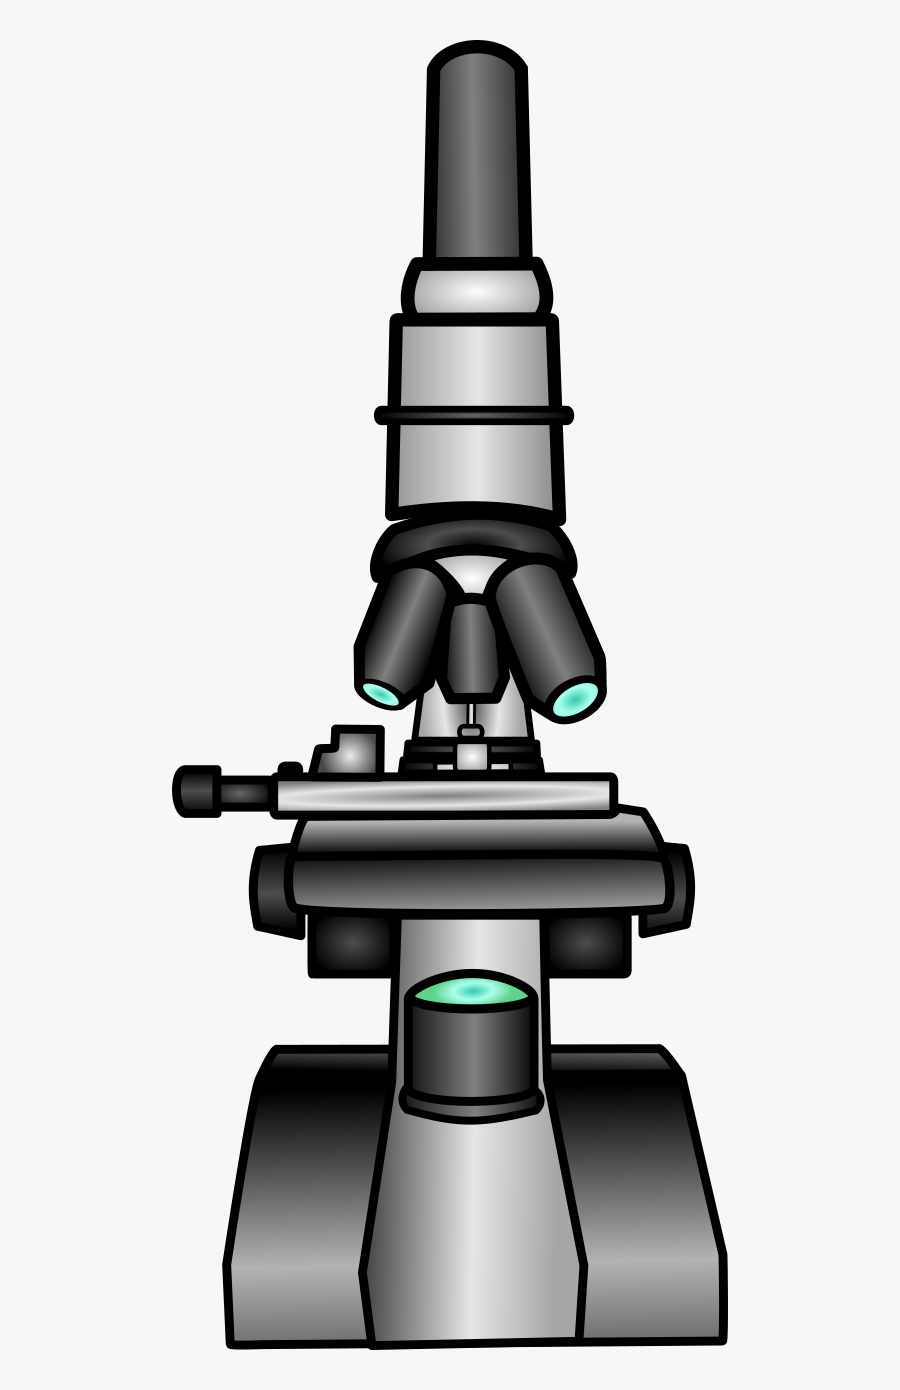 Clipart Science Microscope - Cartoon Microscope Front View, Transparent Clipart